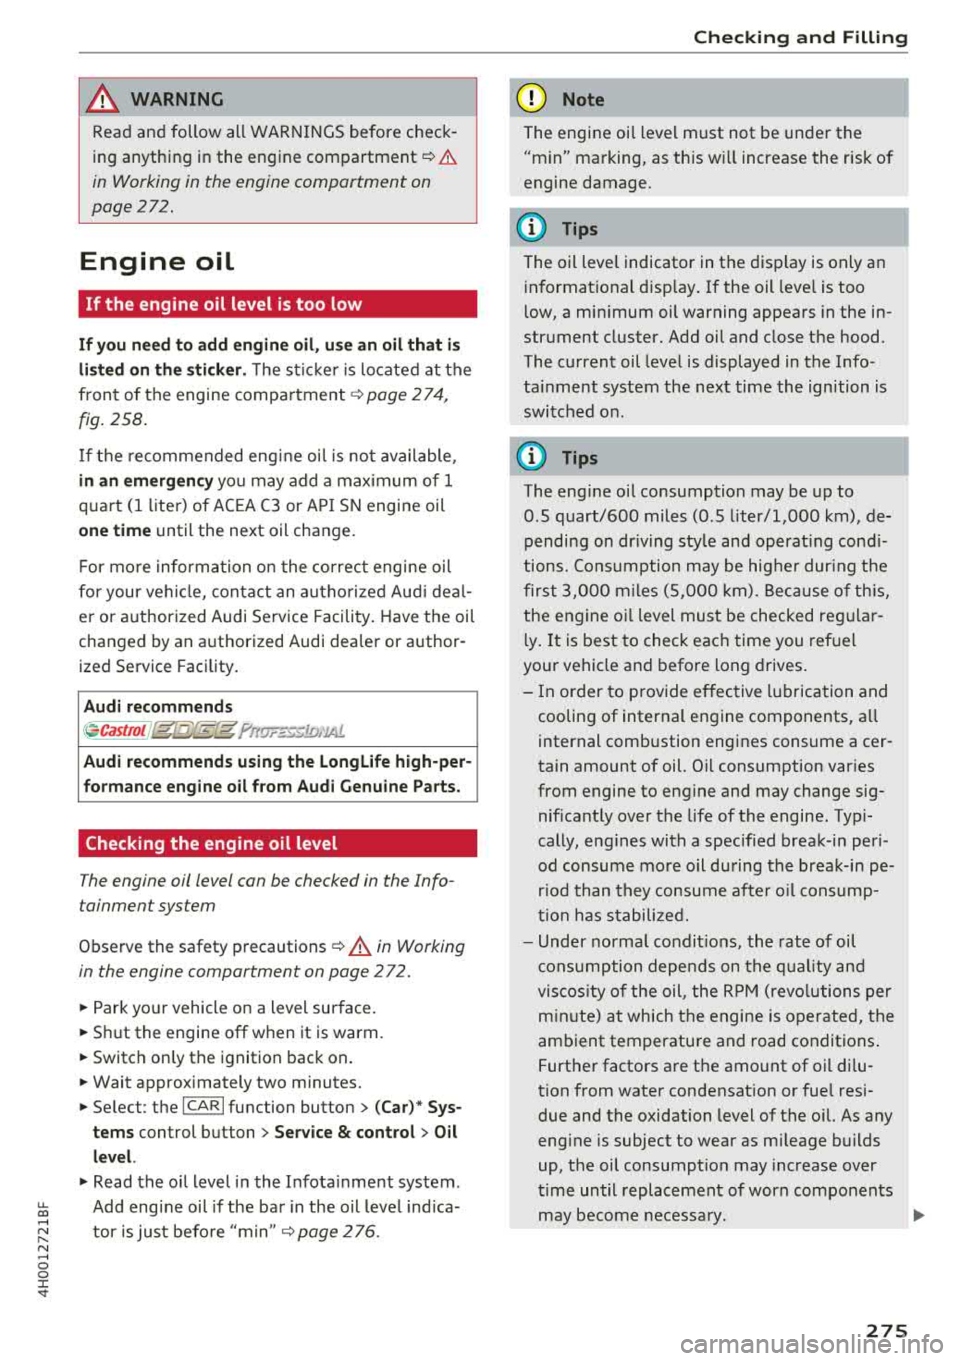 AUDI A8 2018  Owners Manual u. co ..... N 
" N ..... 0 0 :c <t 
& WARNING 
Read  and  follow  all  WARNINGS before check­
ing  anything  in the  engine 
compartment~ .&. 
in Working  in  the  engine  compartment  on 
page  272